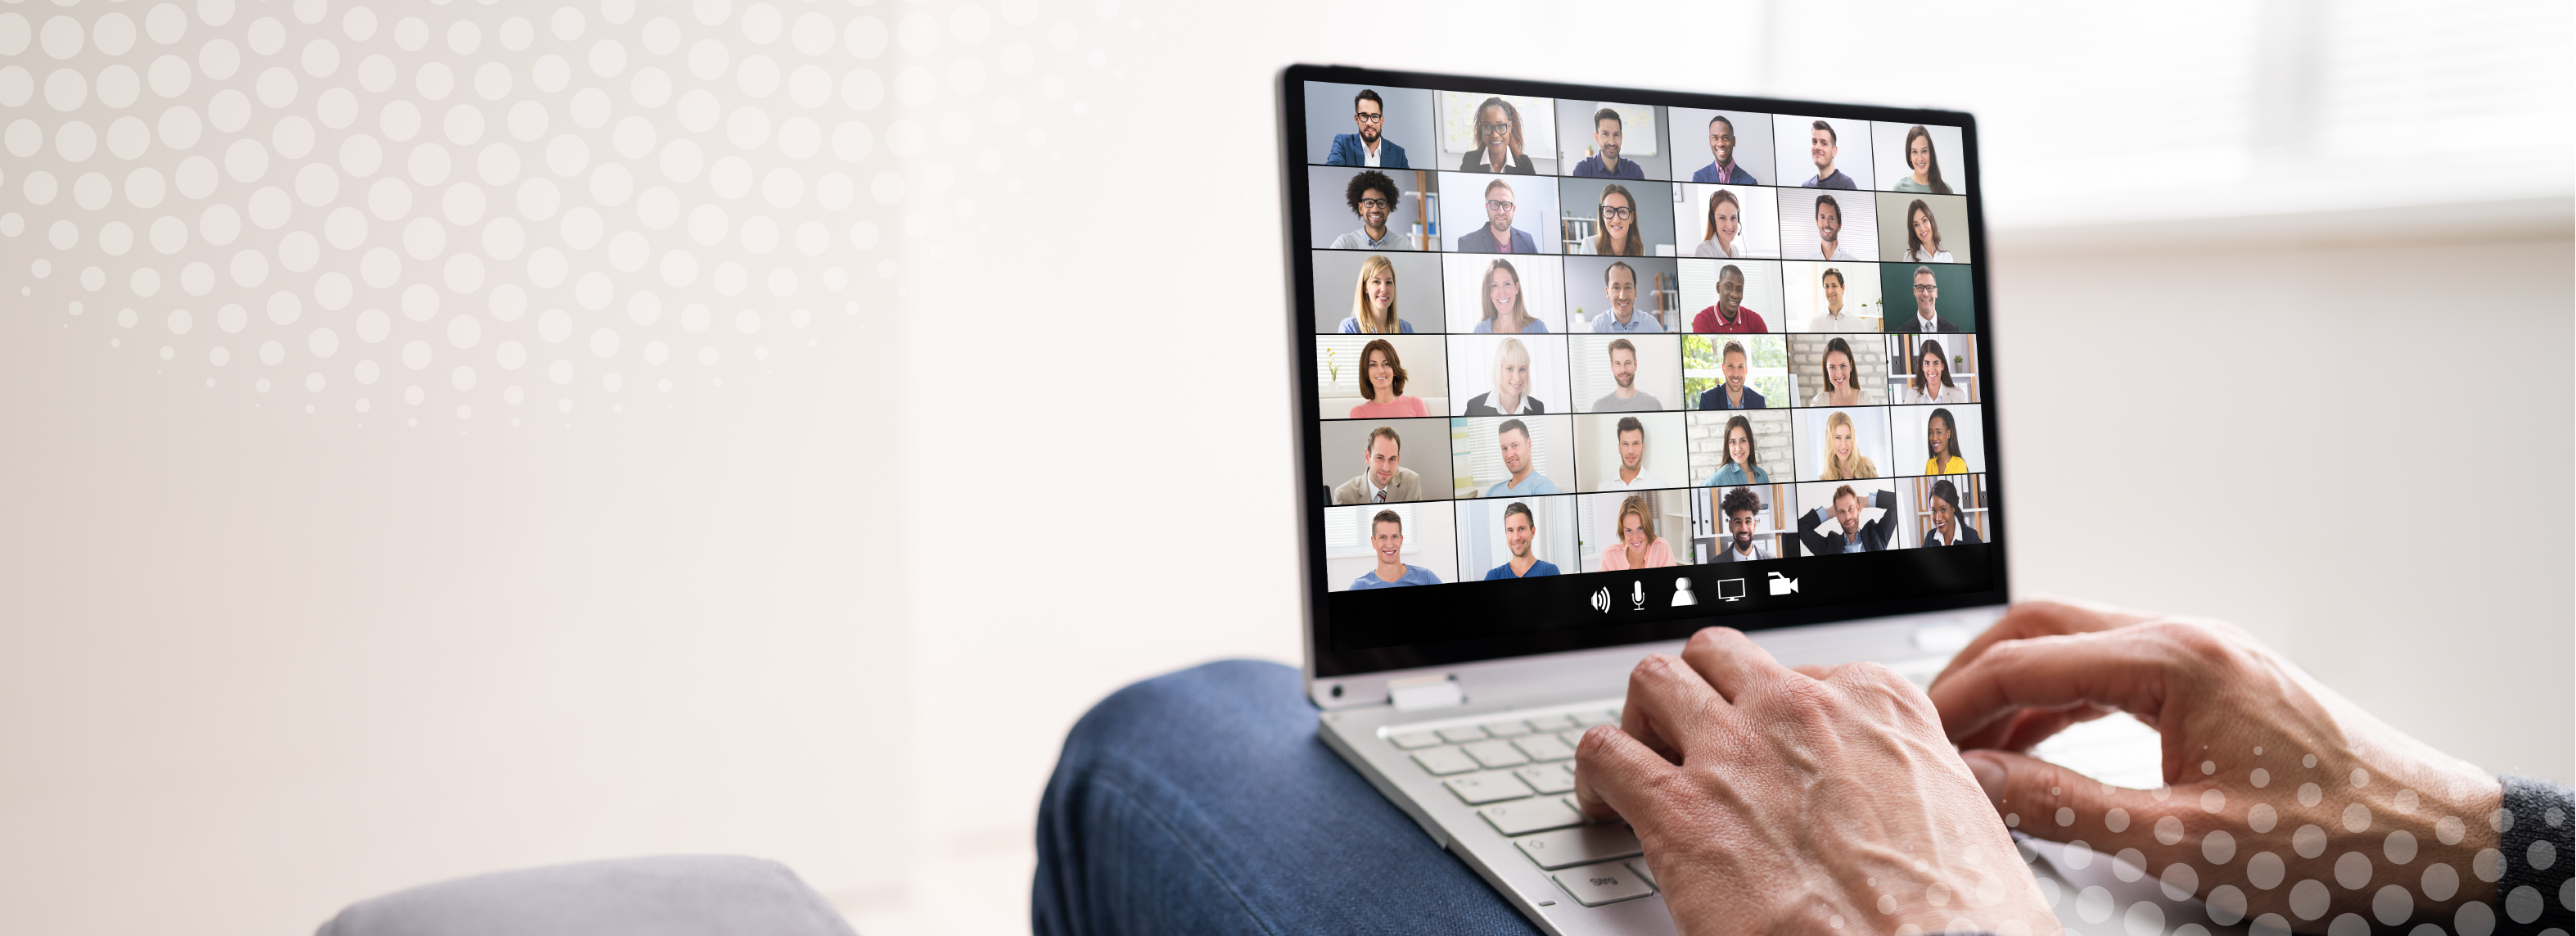 A laptop screen showing a group of people in a meeting 